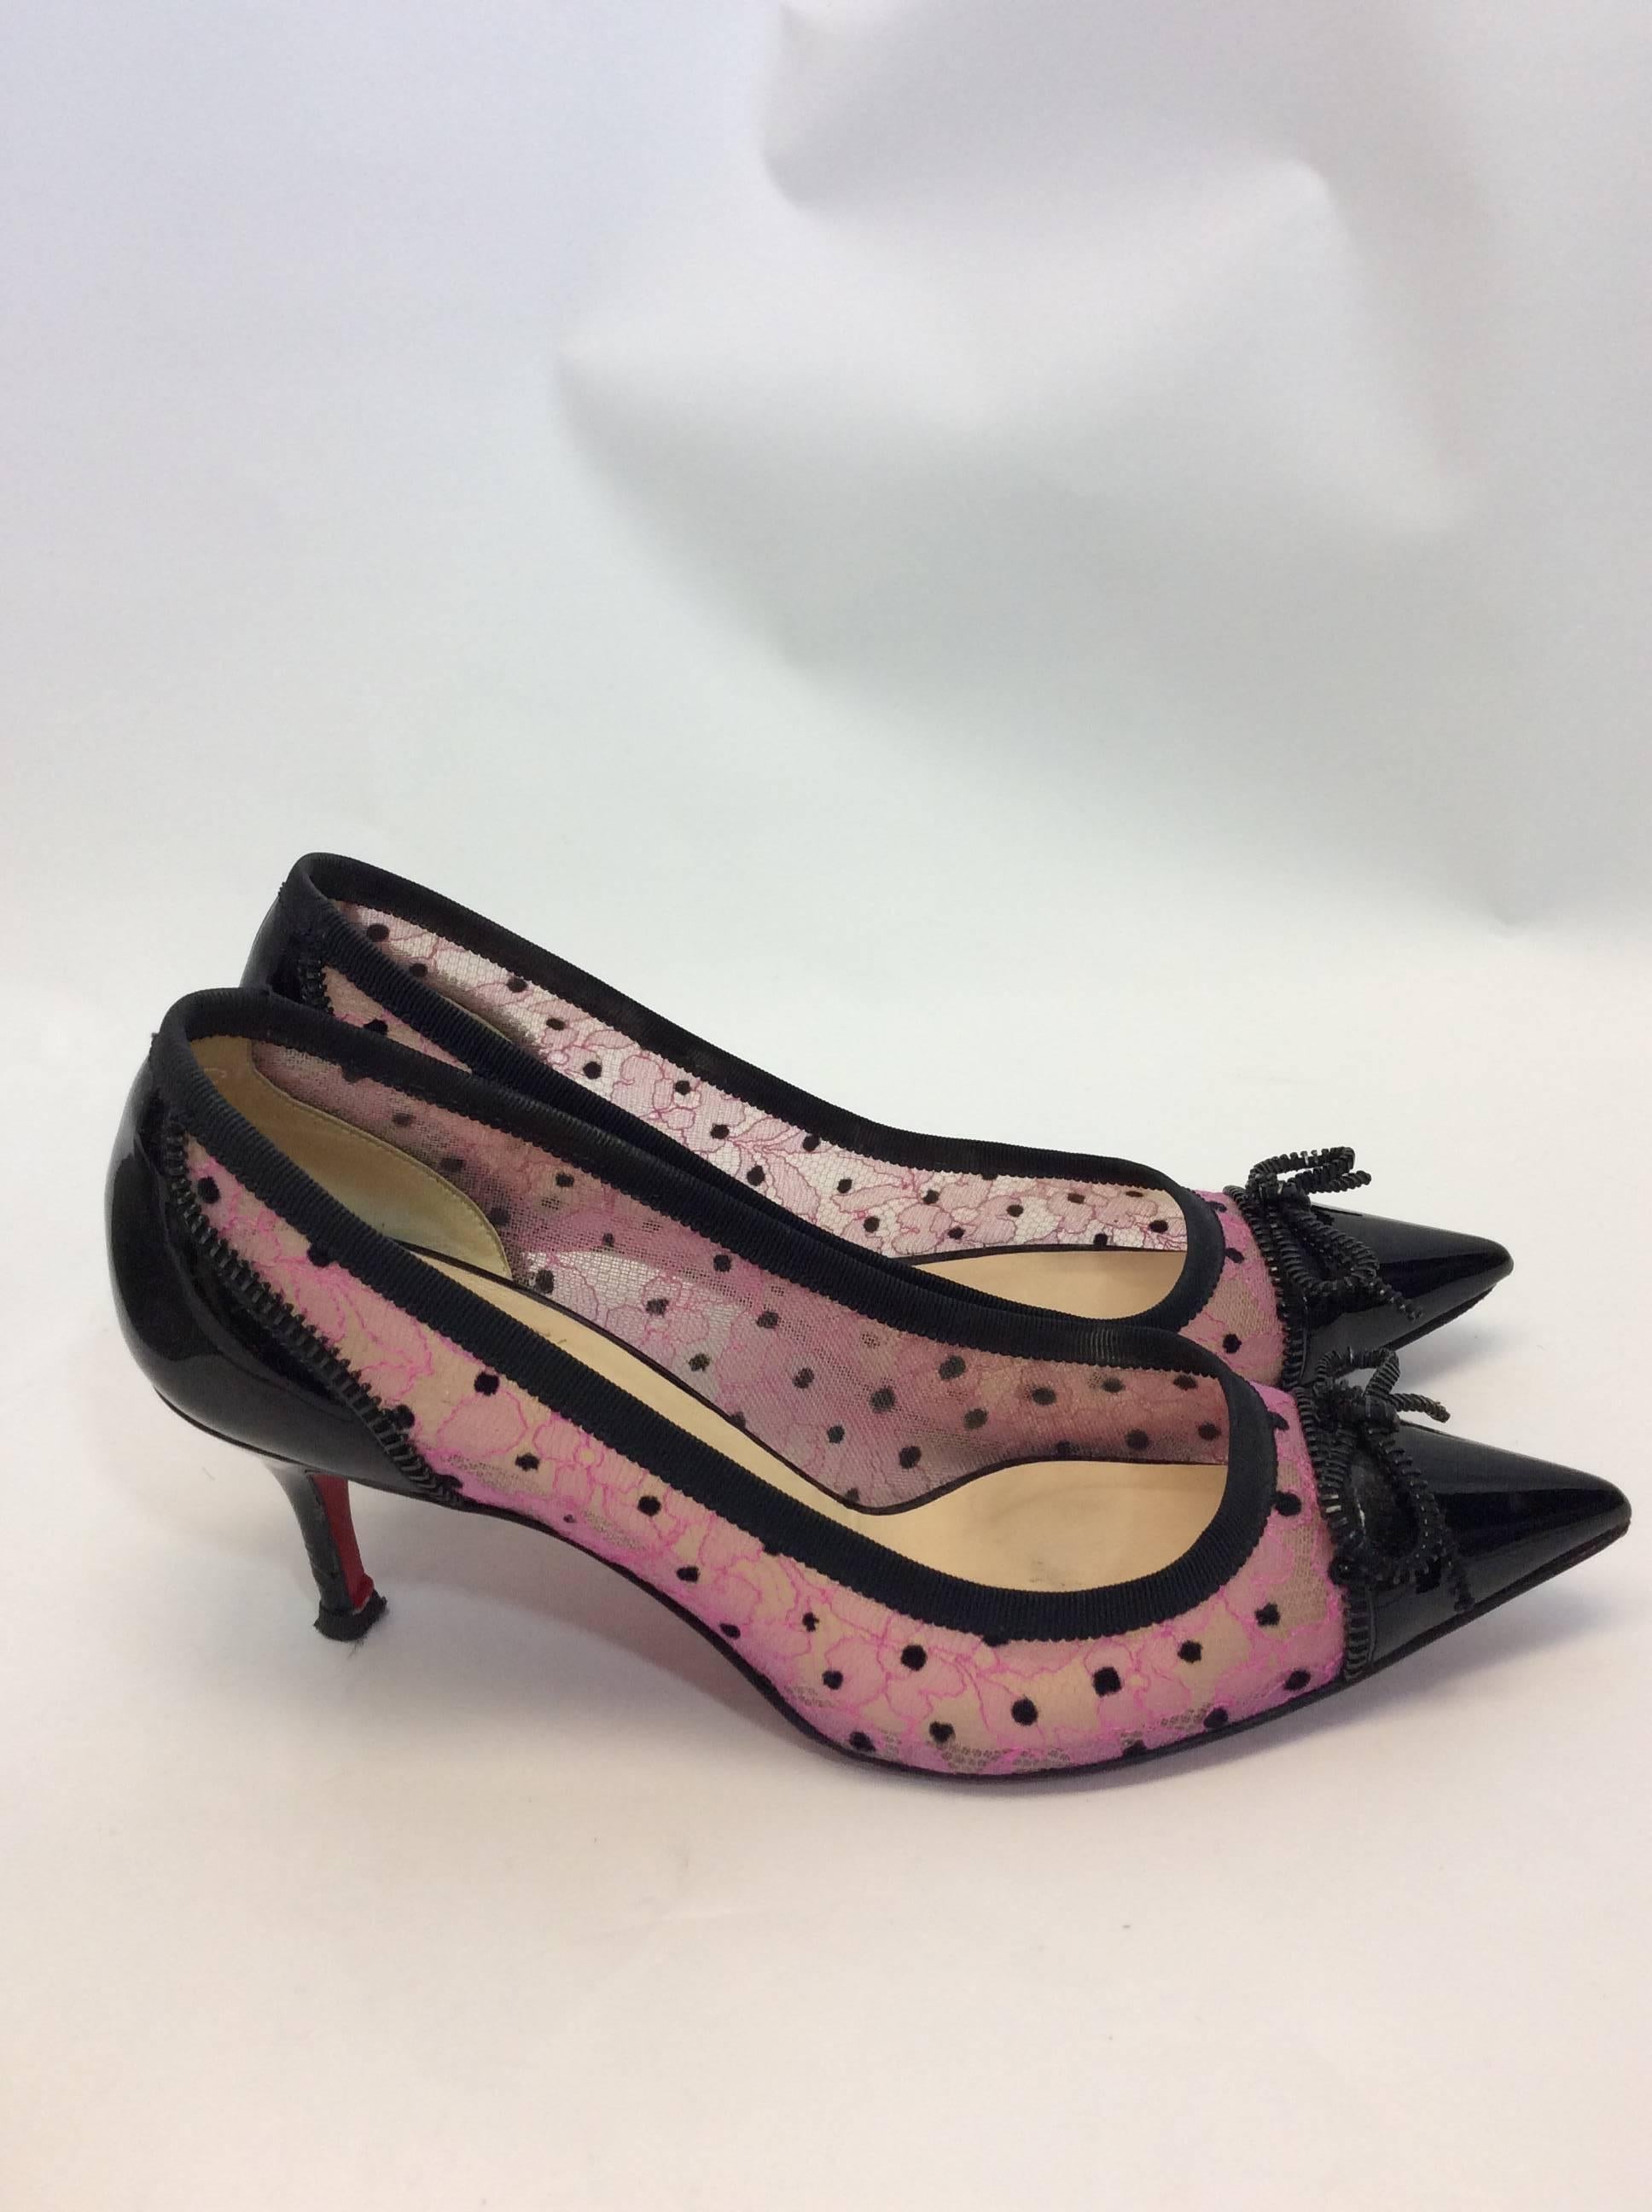 Christian Louboutin Pink Lace Zipper Detail Heels In Excellent Condition For Sale In Narberth, PA